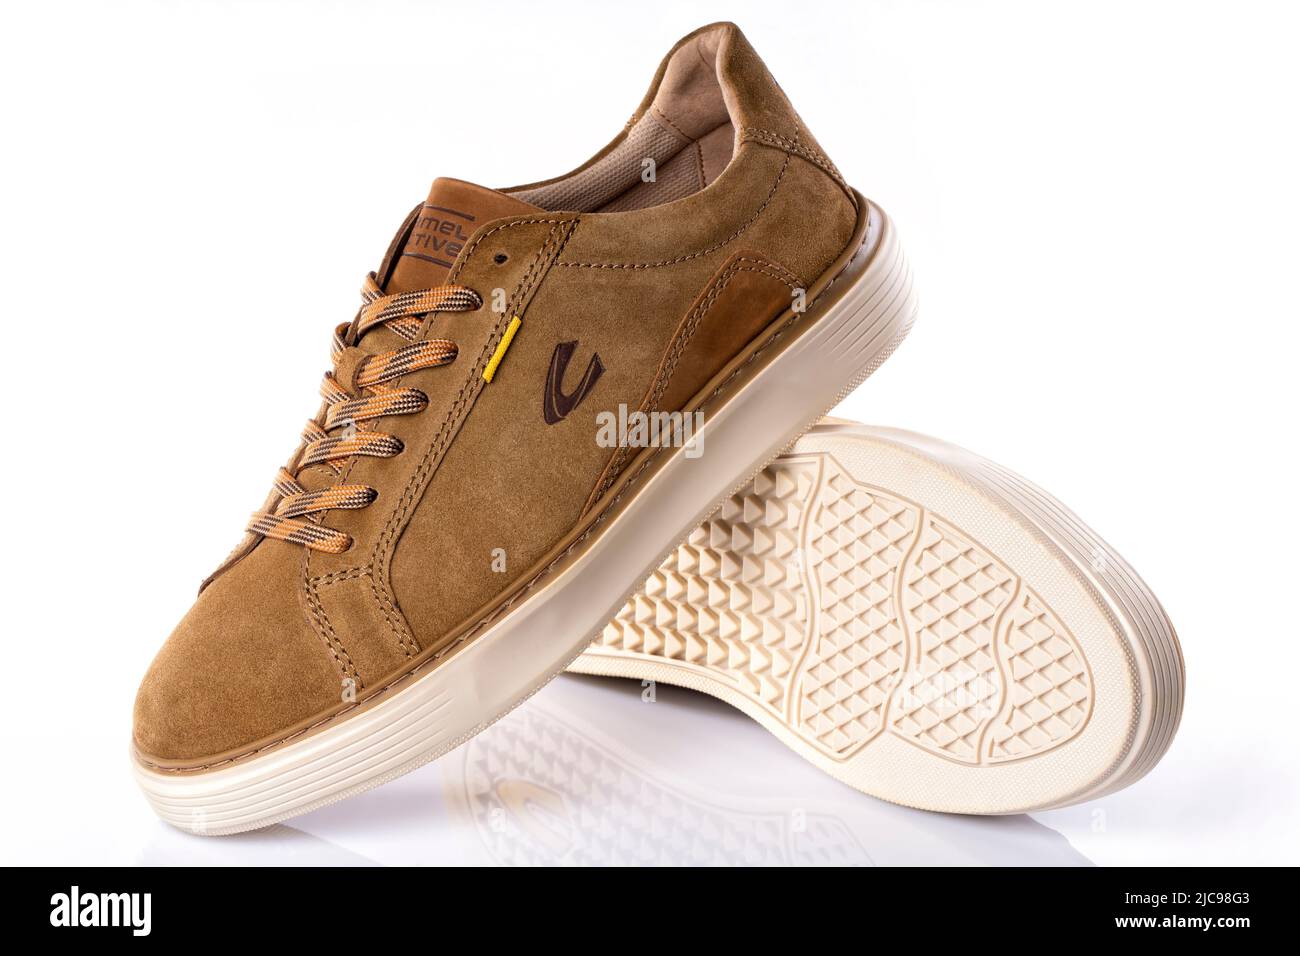 Detail the new Camel Active Avon Sneaker for men in cognac color isolated on white. taken on June 10, 2022 in Spain Stock Photo - Alamy